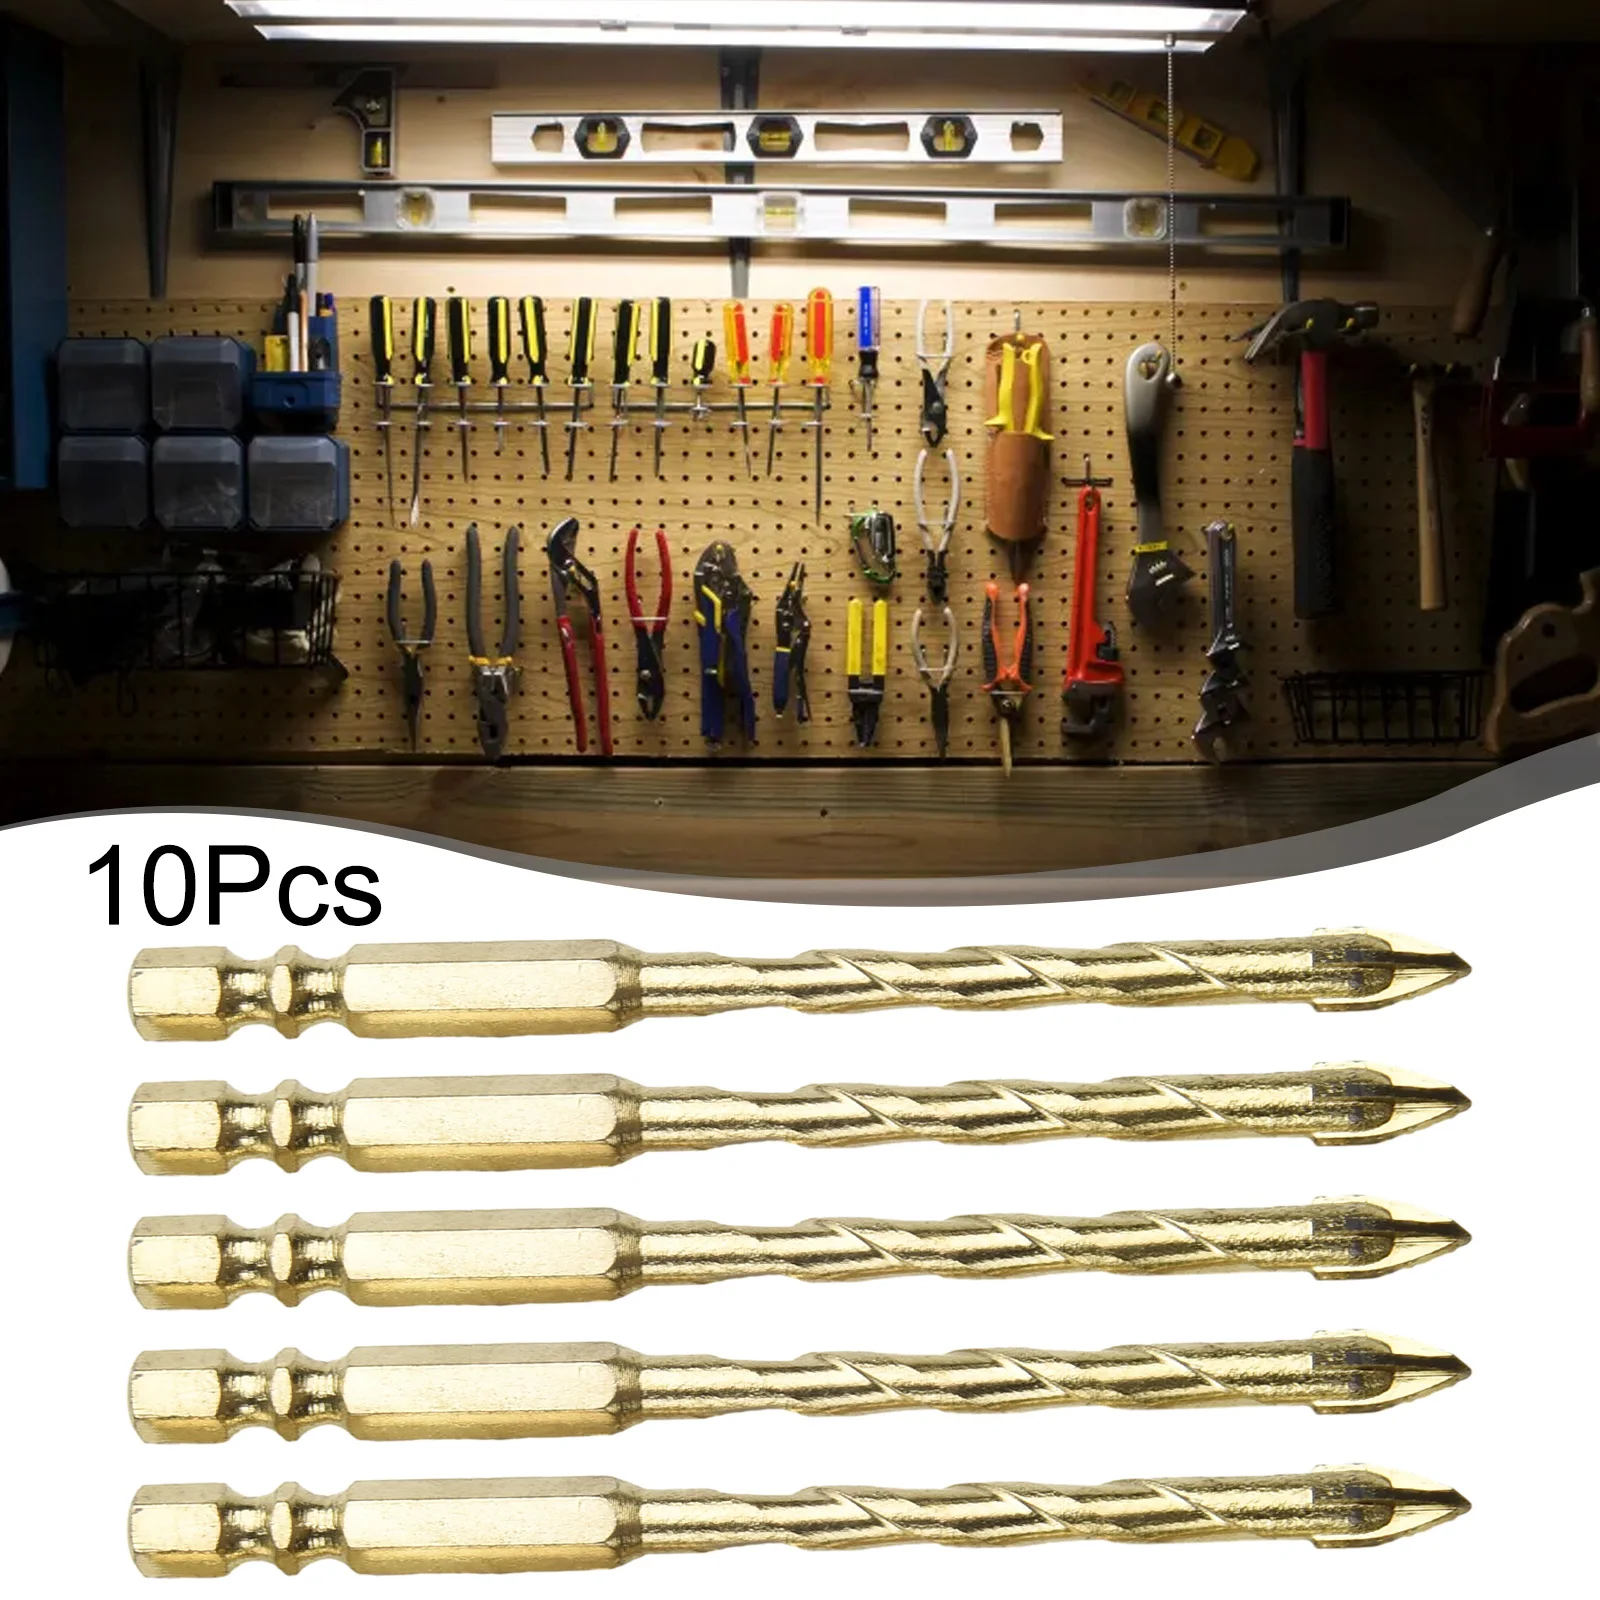 Hex Cross Triangle Drill Bit For All Ceramic Vitrified Tile Glass Marble Granite 10pcs 6mm Drill Bit Durable And Hot Sale 10pcs drilling holesaw cutting kit 8 50mm diamond coated hole saw durable cutter drill bit set for tile ceramic marble glass